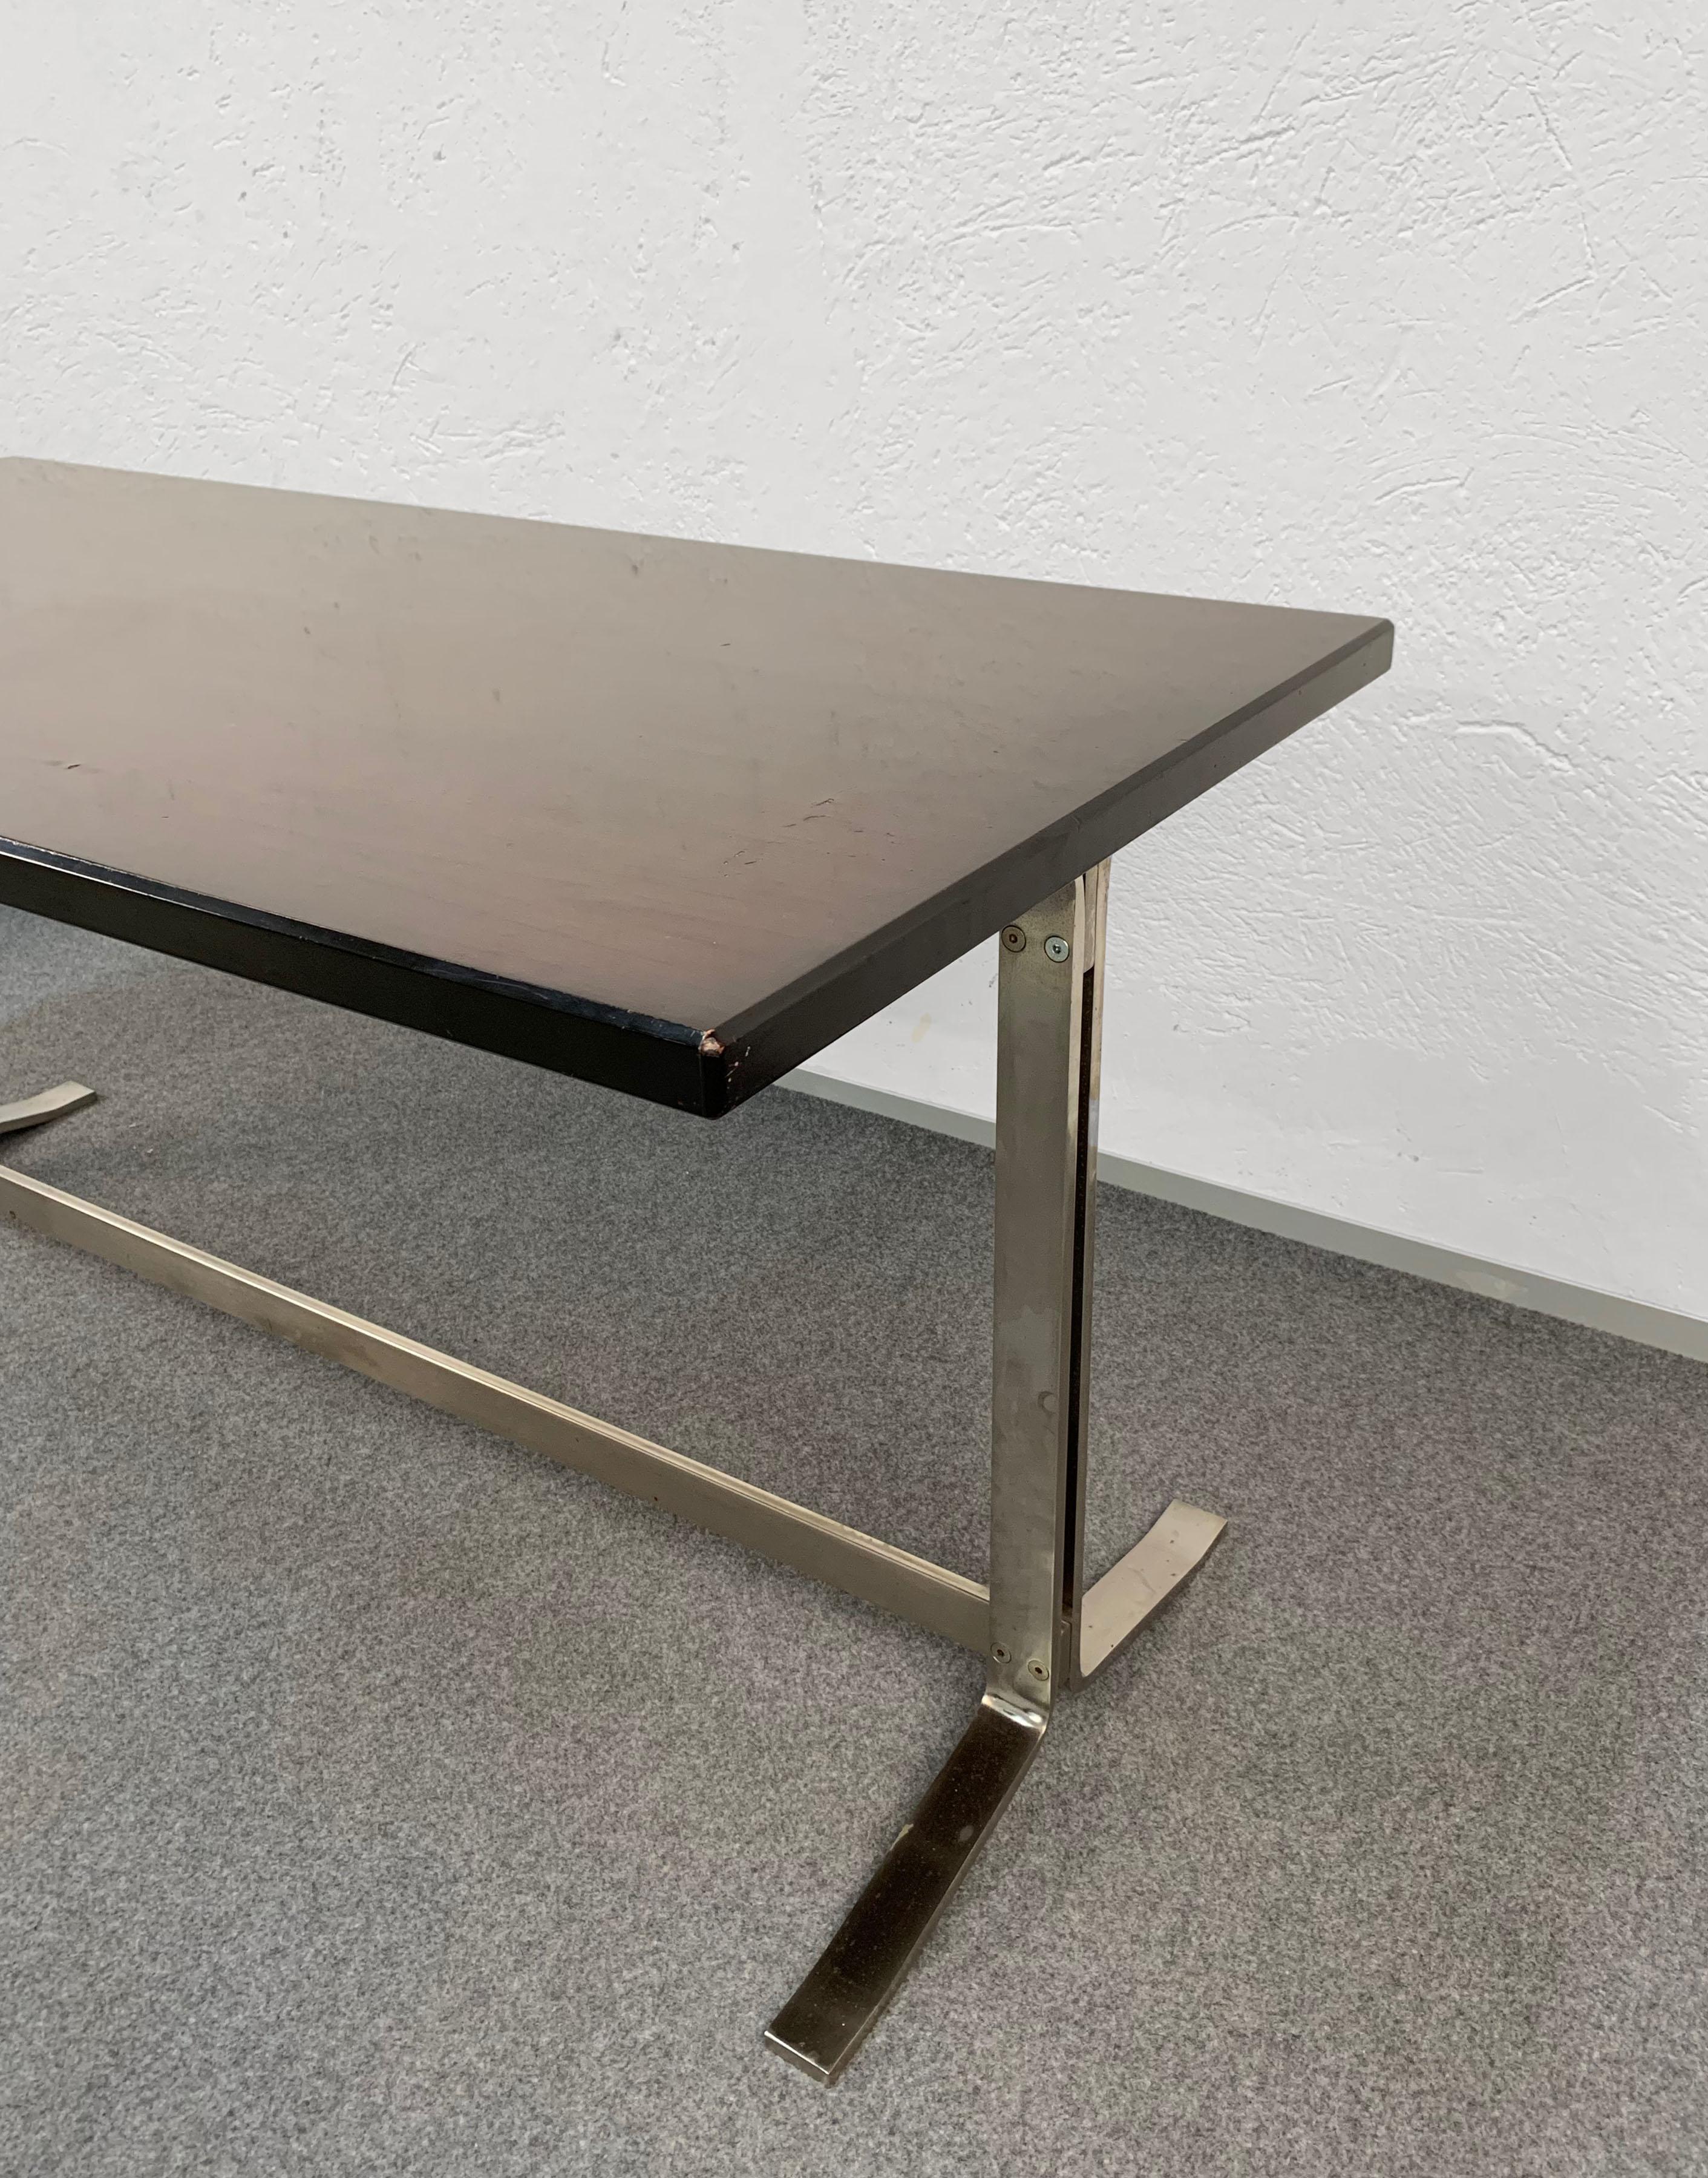 Mid-20th Century Desk or Dinning Table by Gianni Moscatelli for Formanova Steel Base, Italy, 1960s